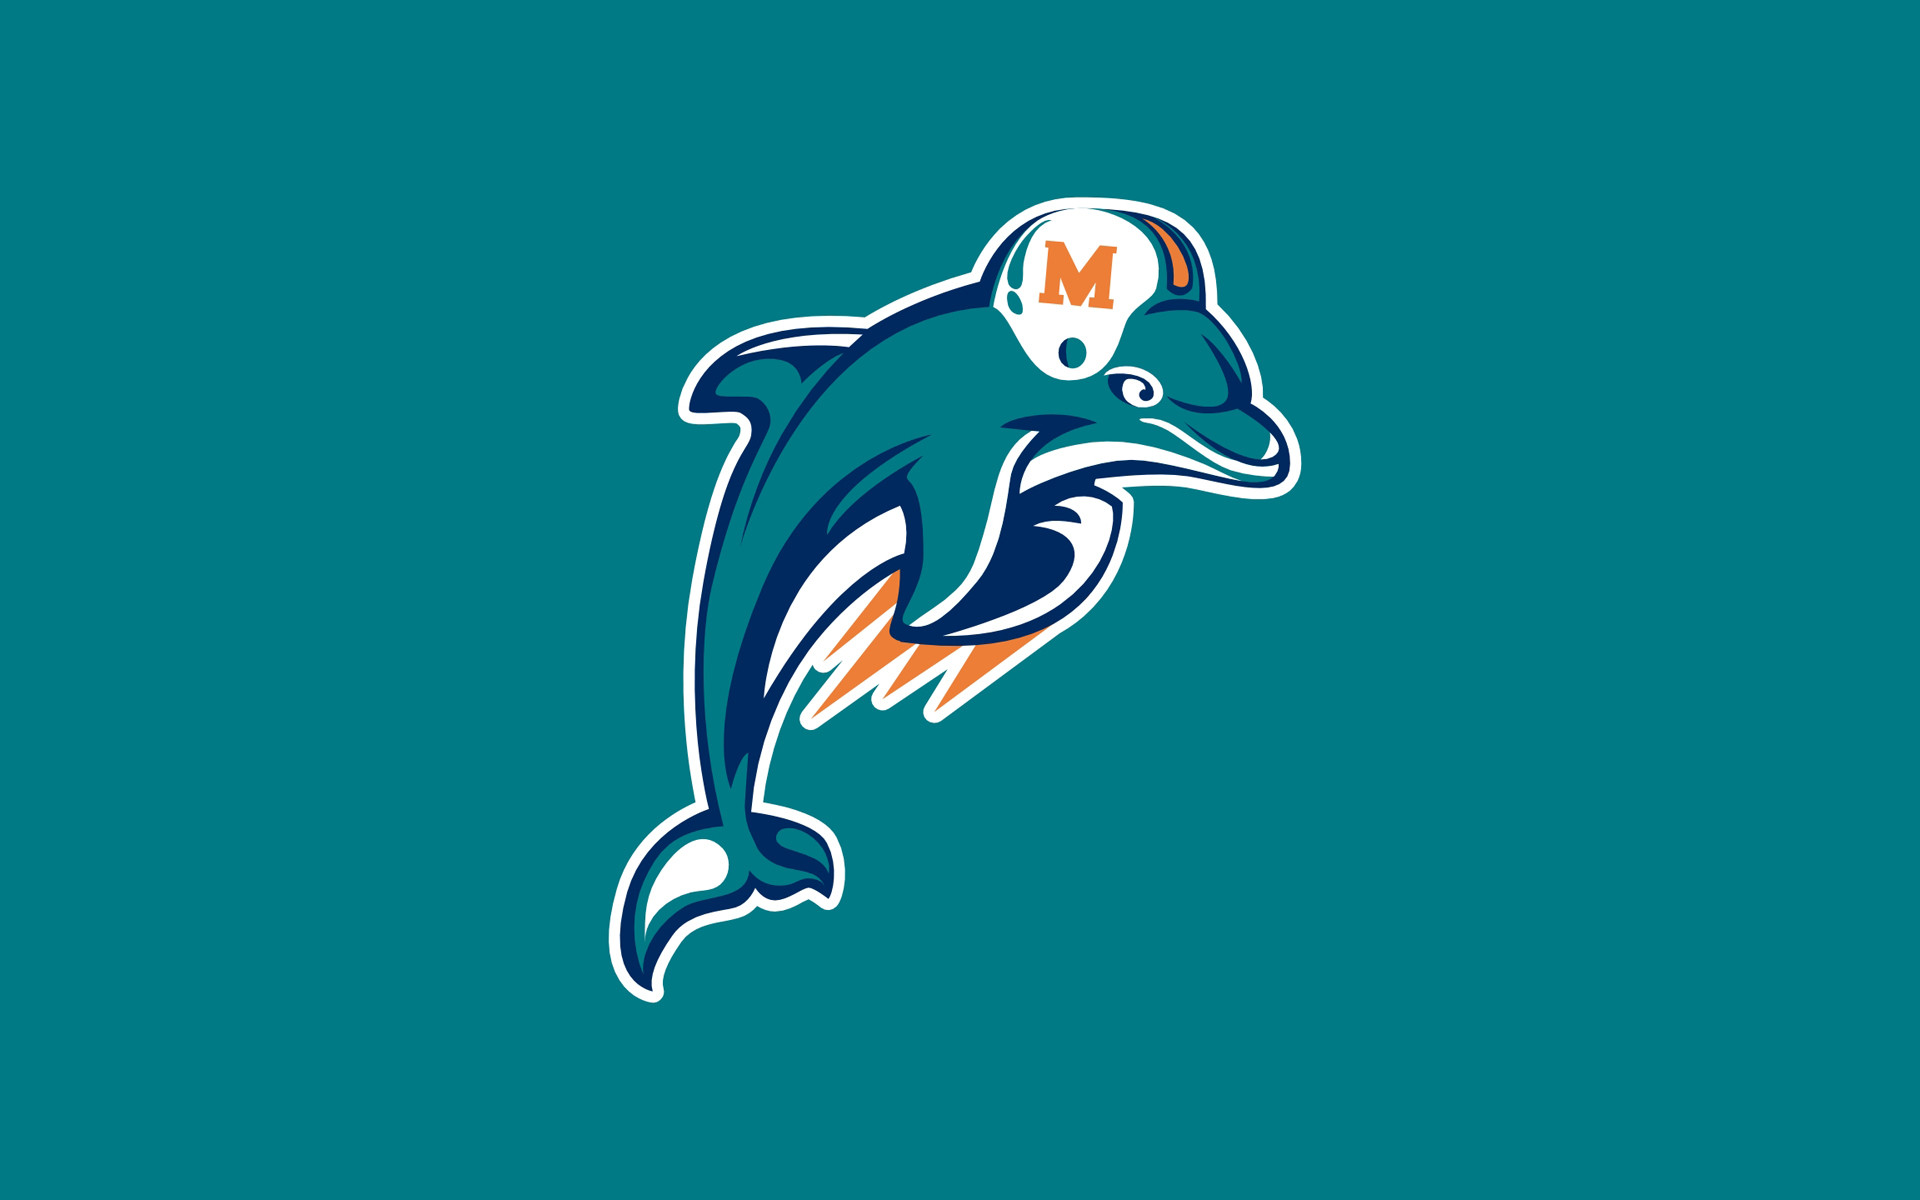 Wallpaper wallpaper sport logo NFL glitter checkered Miami Dolphins  images for desktop section спорт  download